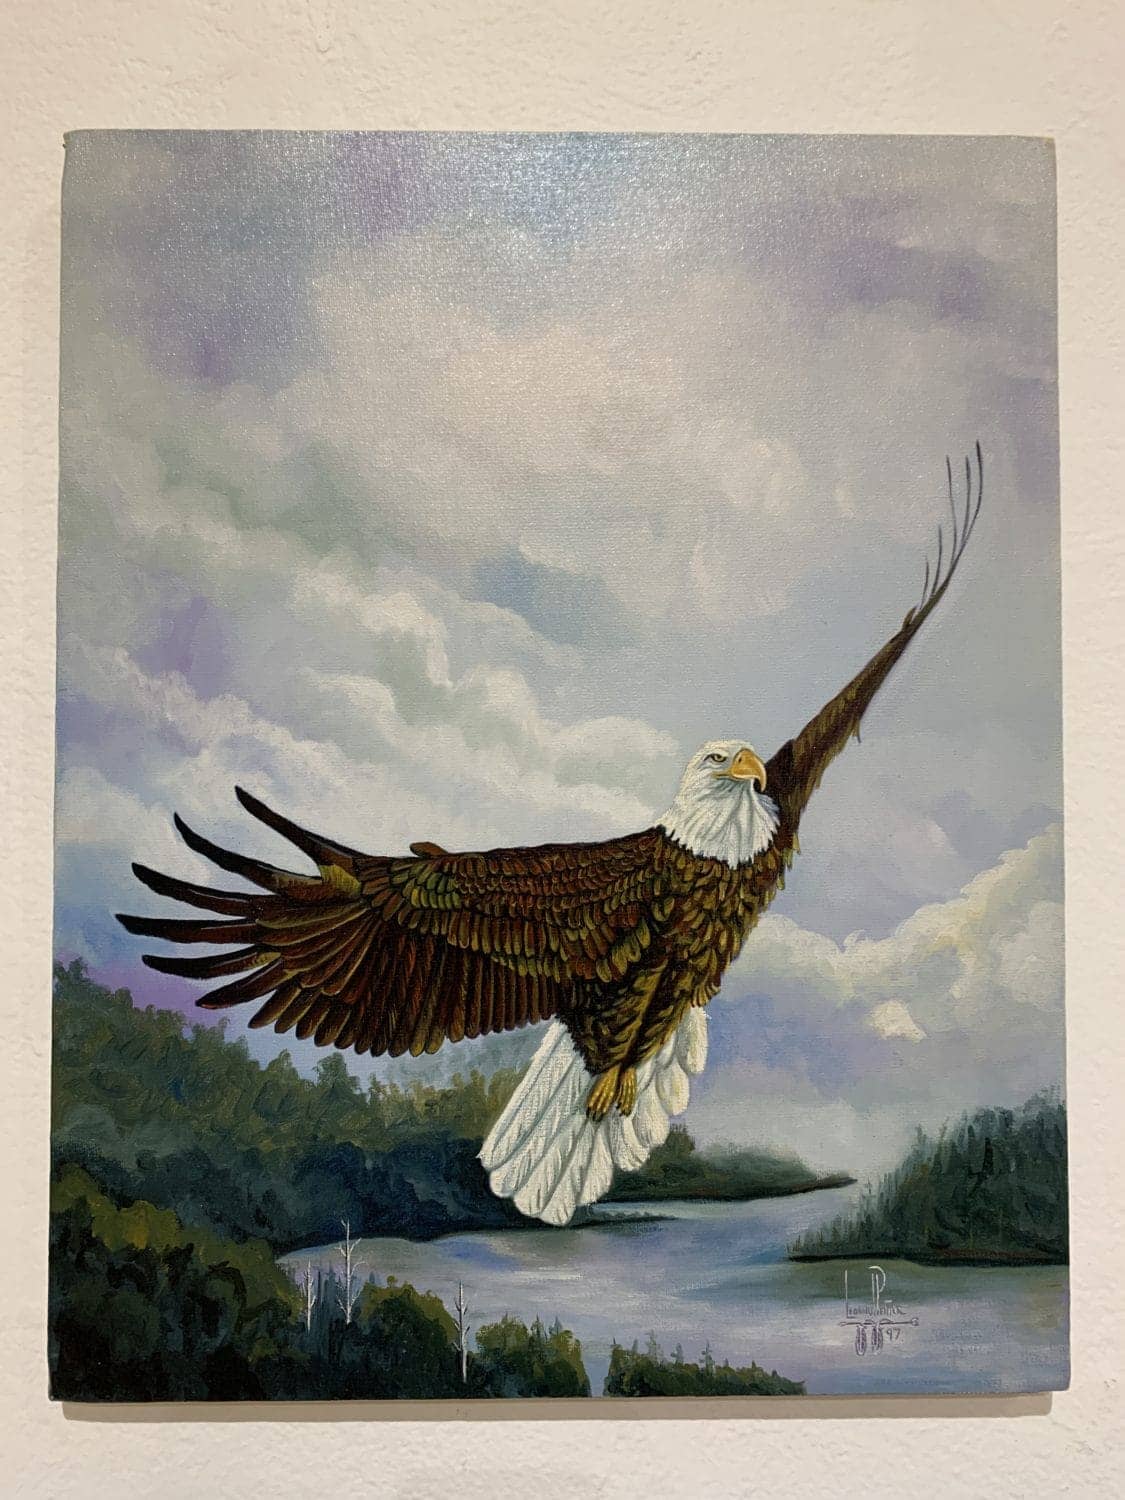 Eagle-Rising-art-by-Leonard-Peltier-on-exhibit-at-Richmond-Art-Center, Leonard Peltier is one of America’s longest-serving Political Prisoners, and Biden may be his last hope, Behind Enemy Lines 